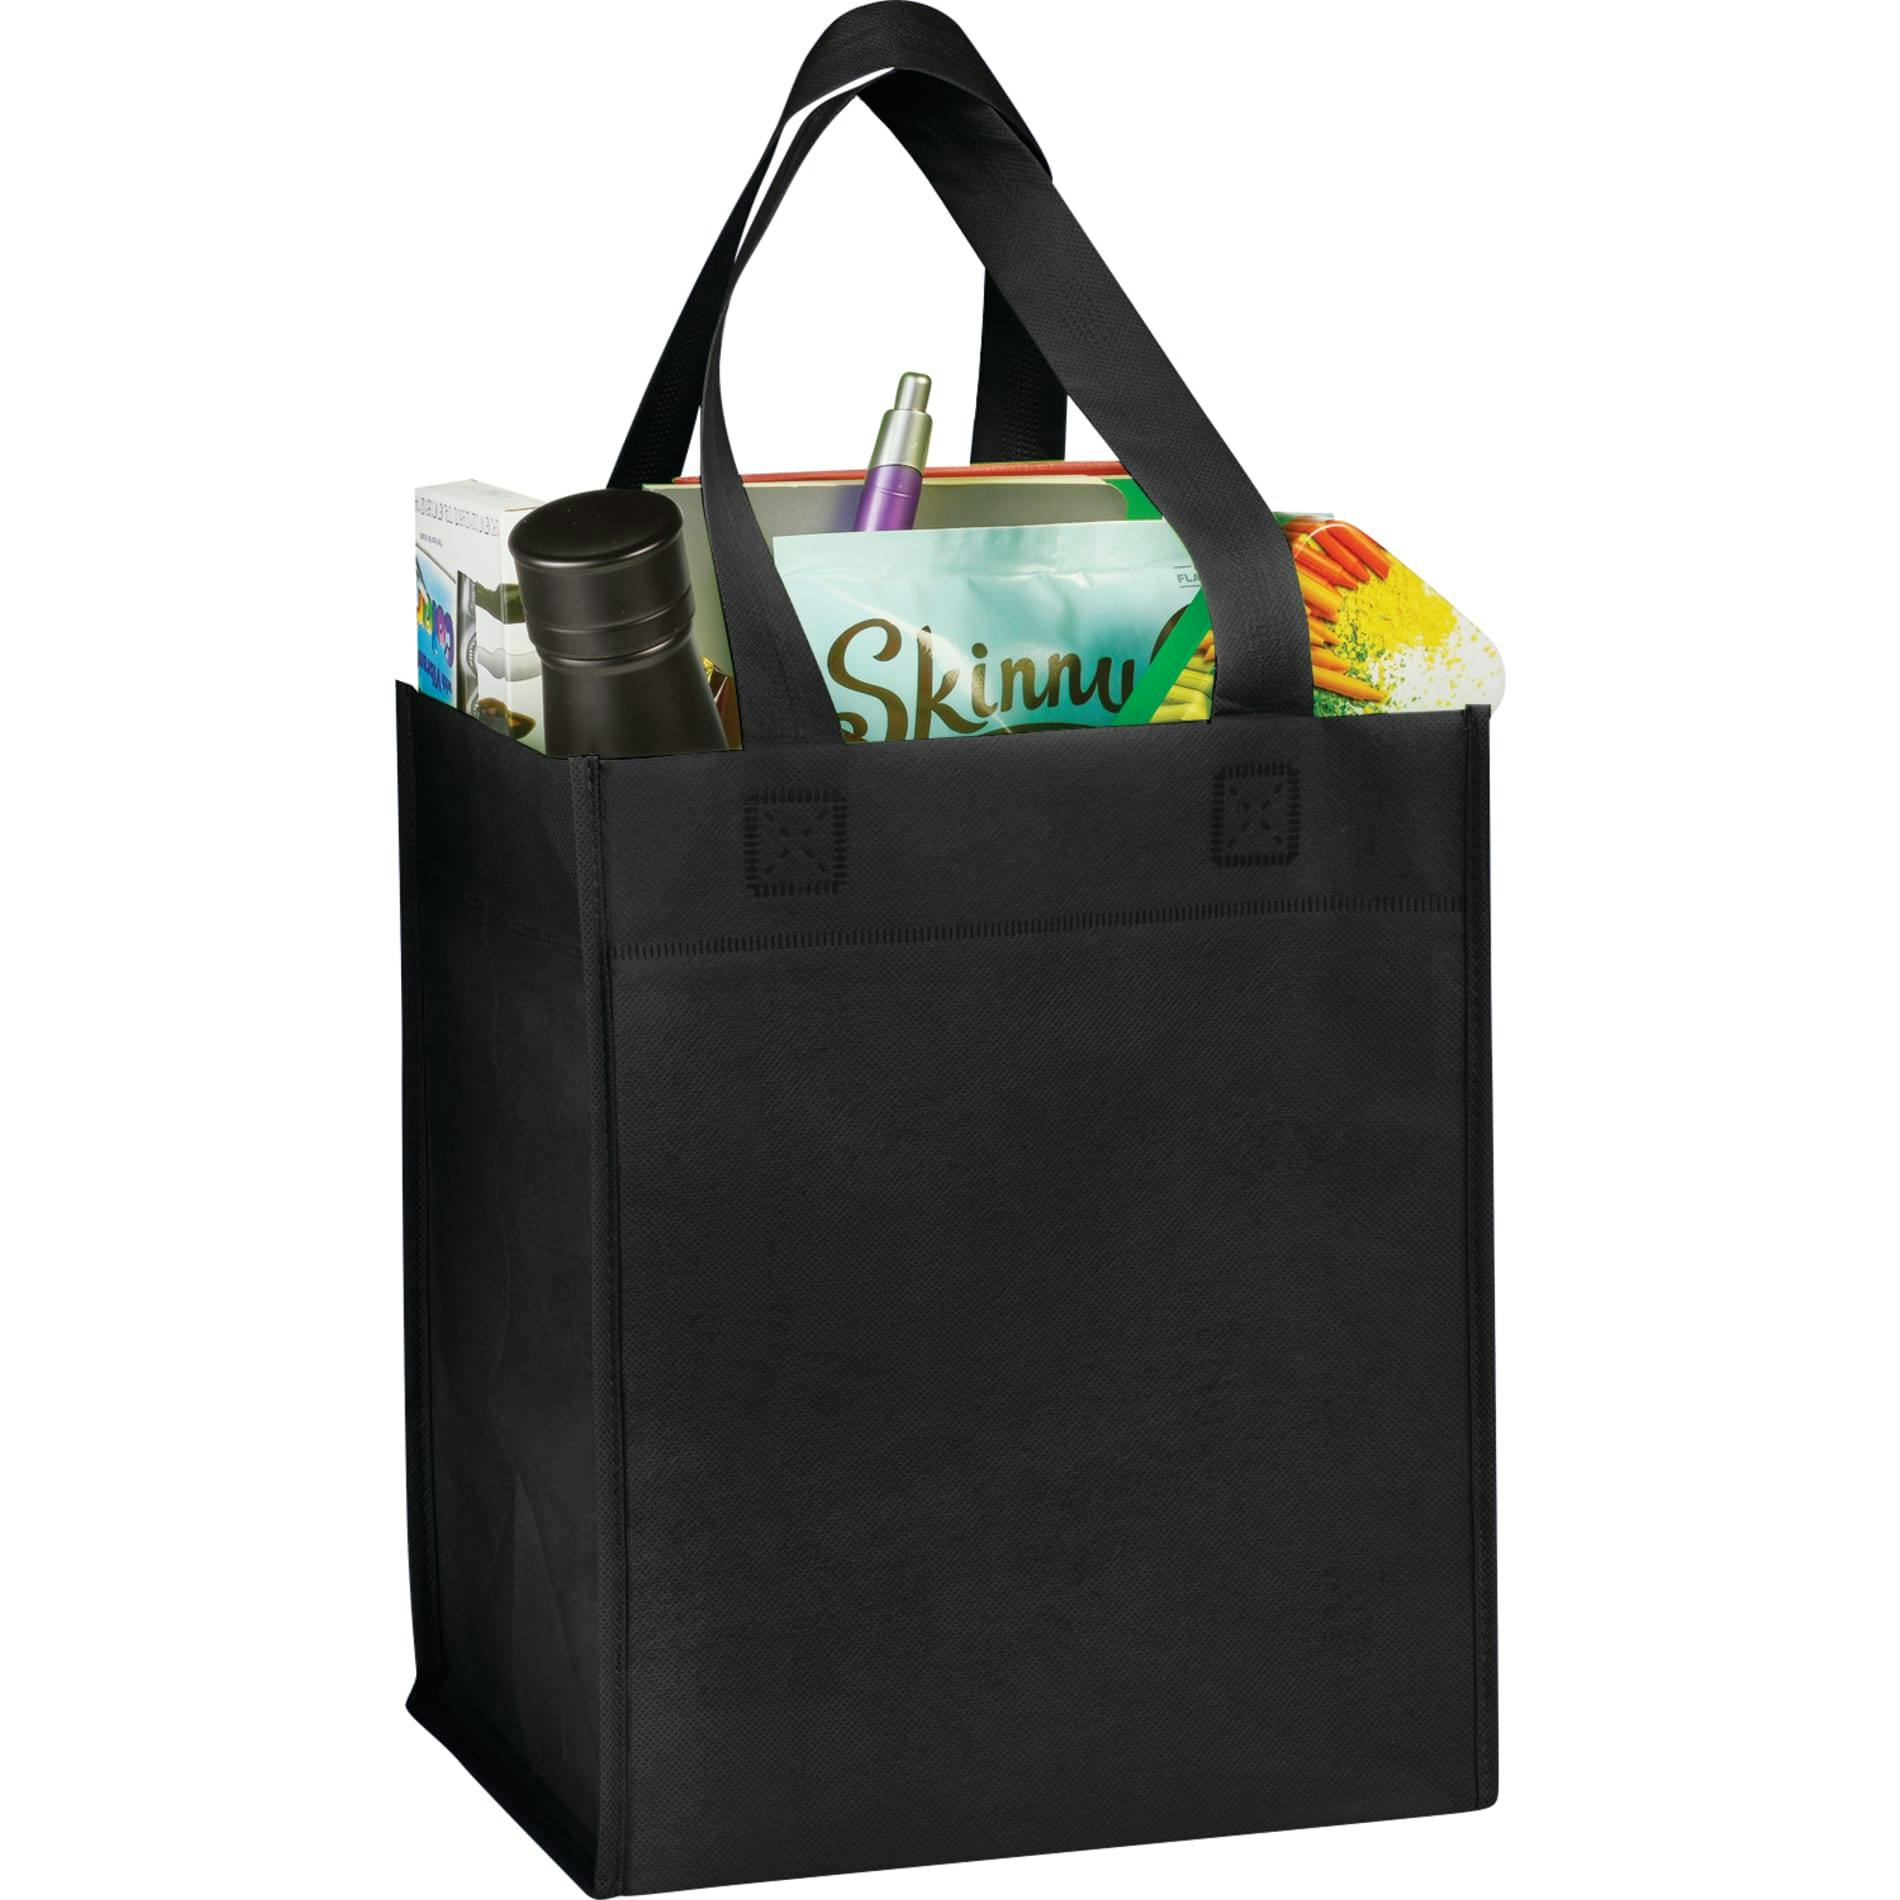 Basic Grocery Tote - additional Image 2